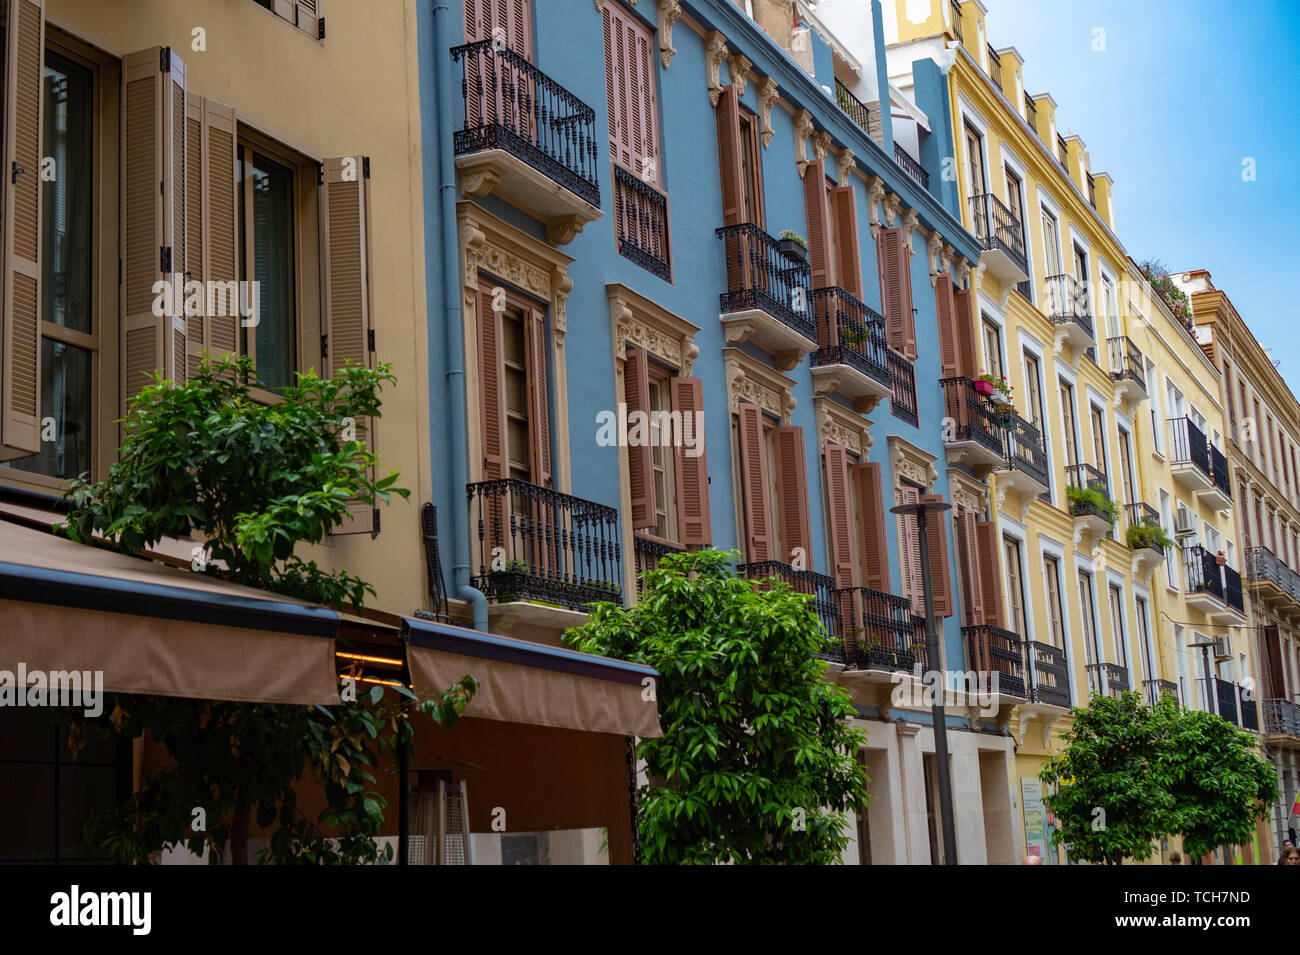 Colorful Decorated exteriours residental buildings in Malaga city, Andalusia, Spain. It's a popular shopping destination for tourists and locals Stock Photo